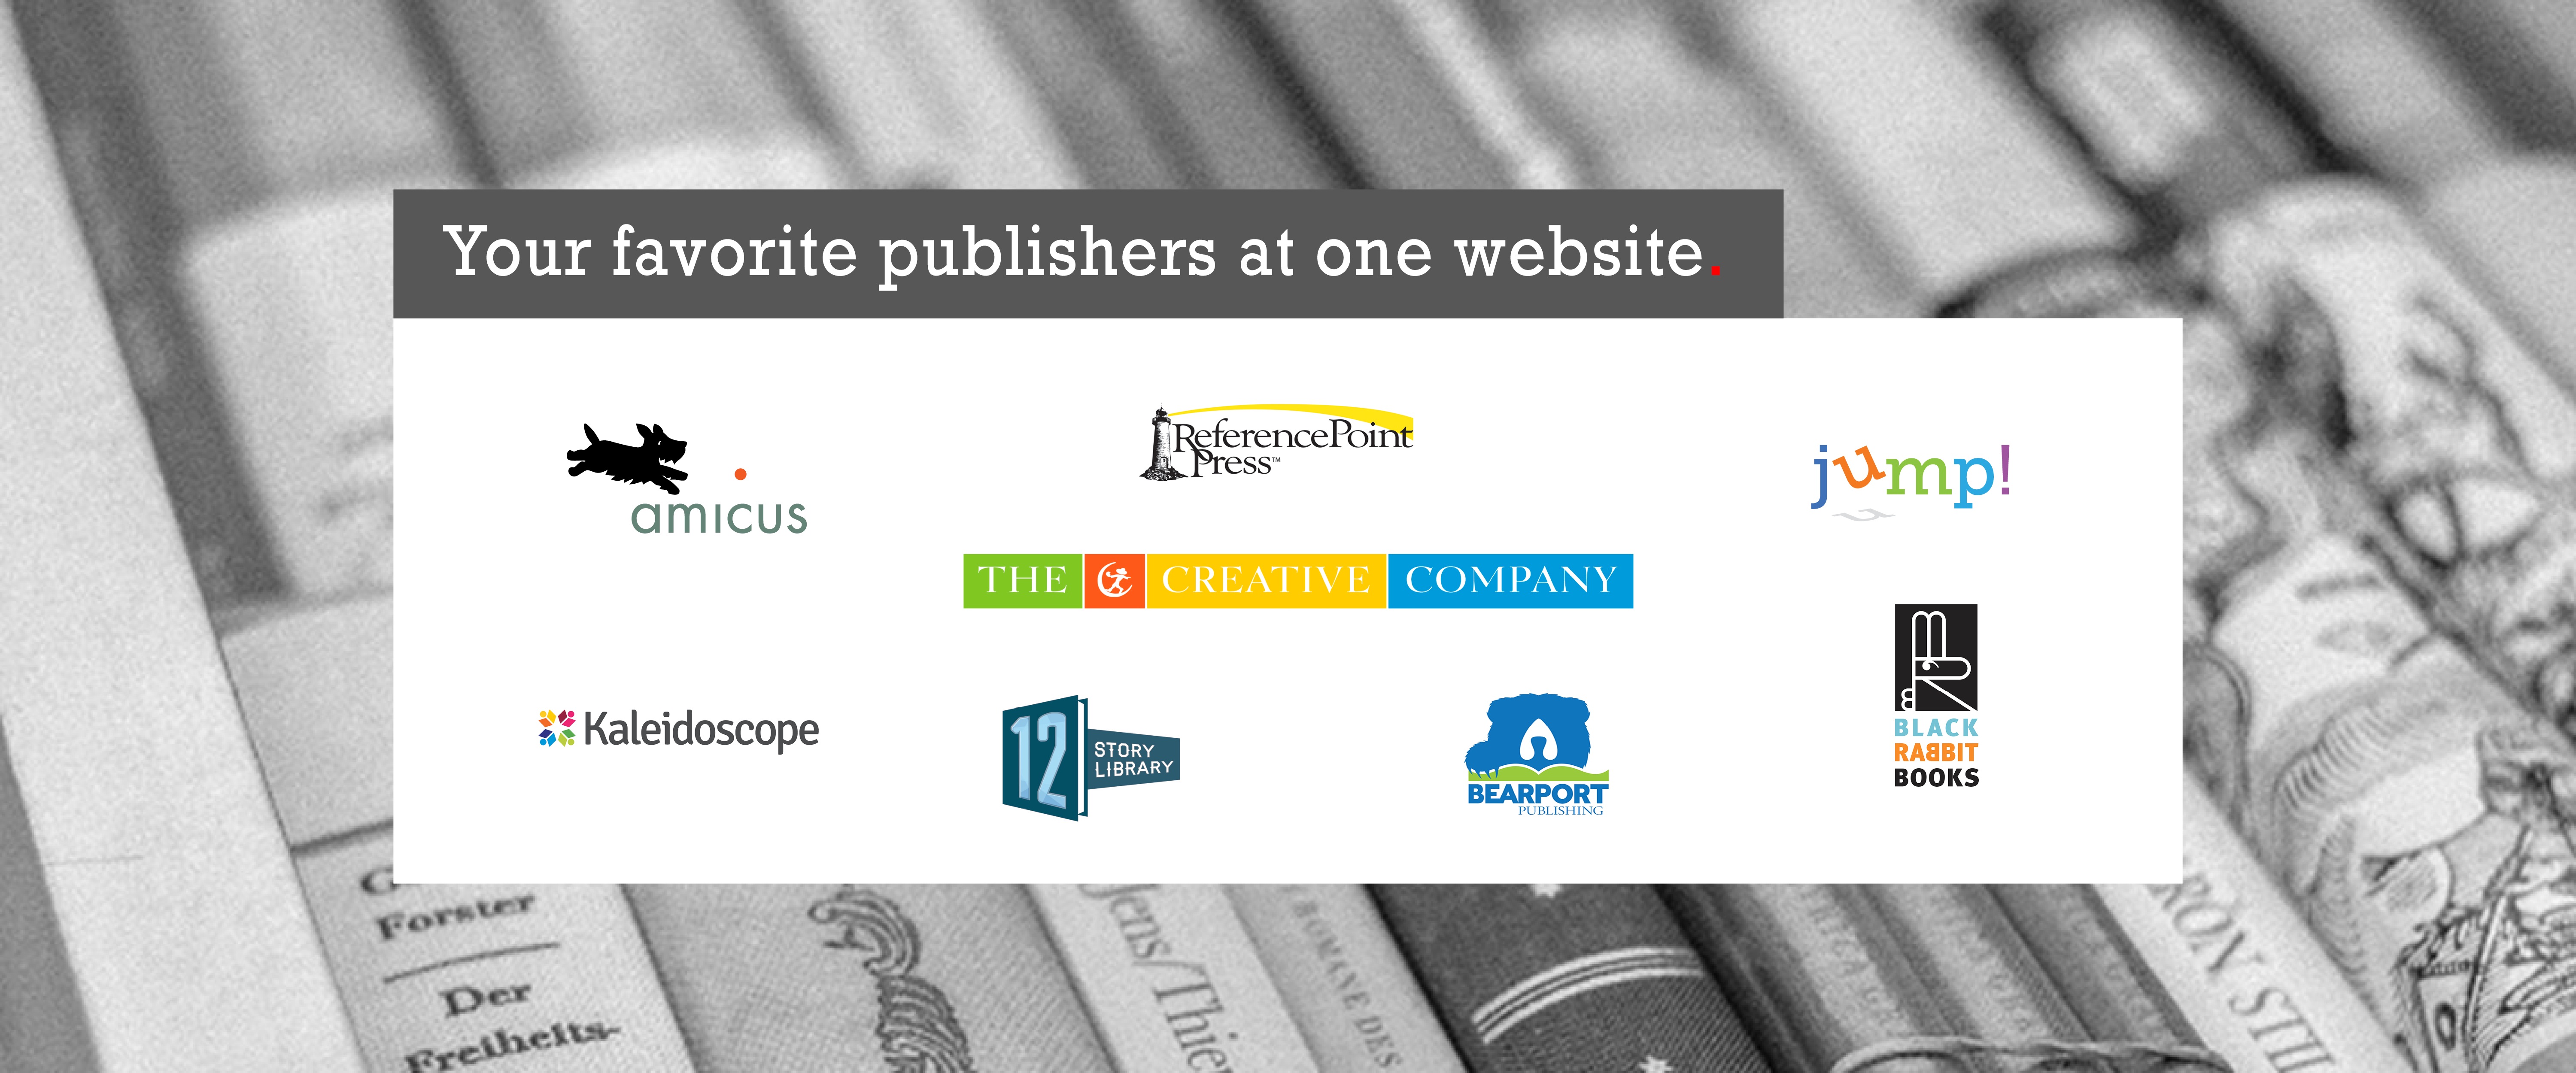 Your favorite publishers at one site 